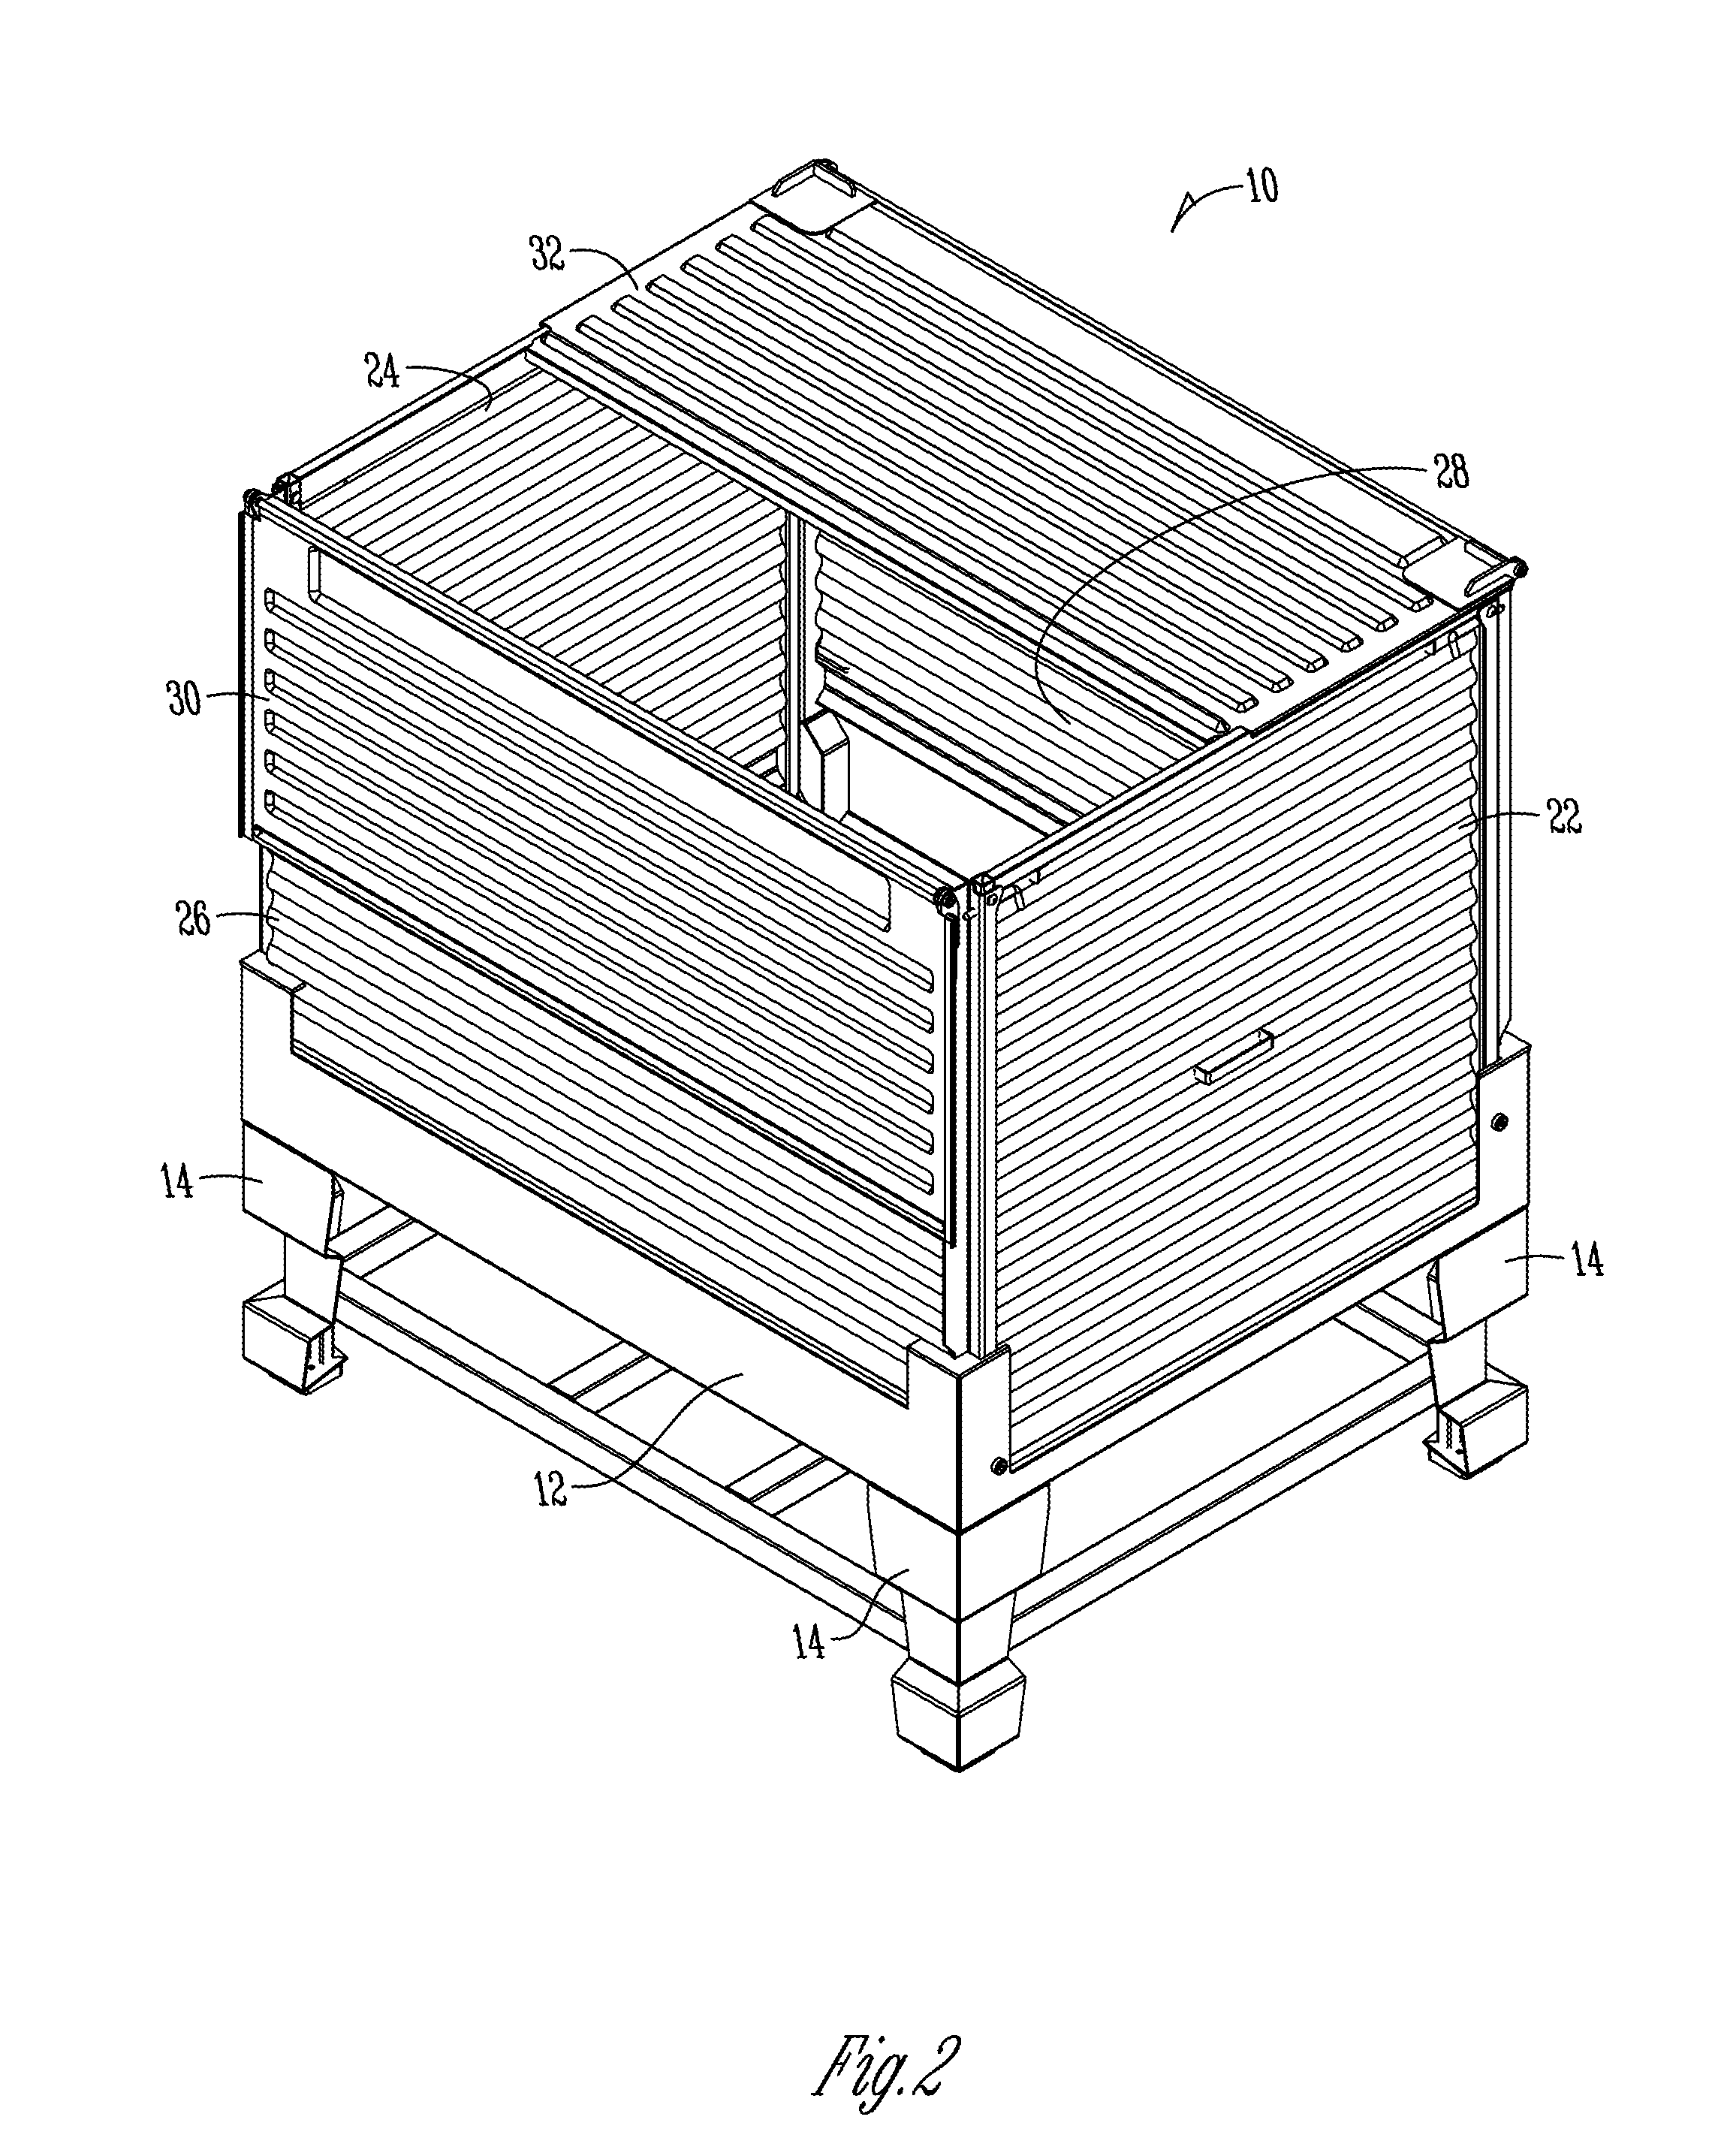 Folding seed box with fork lift base